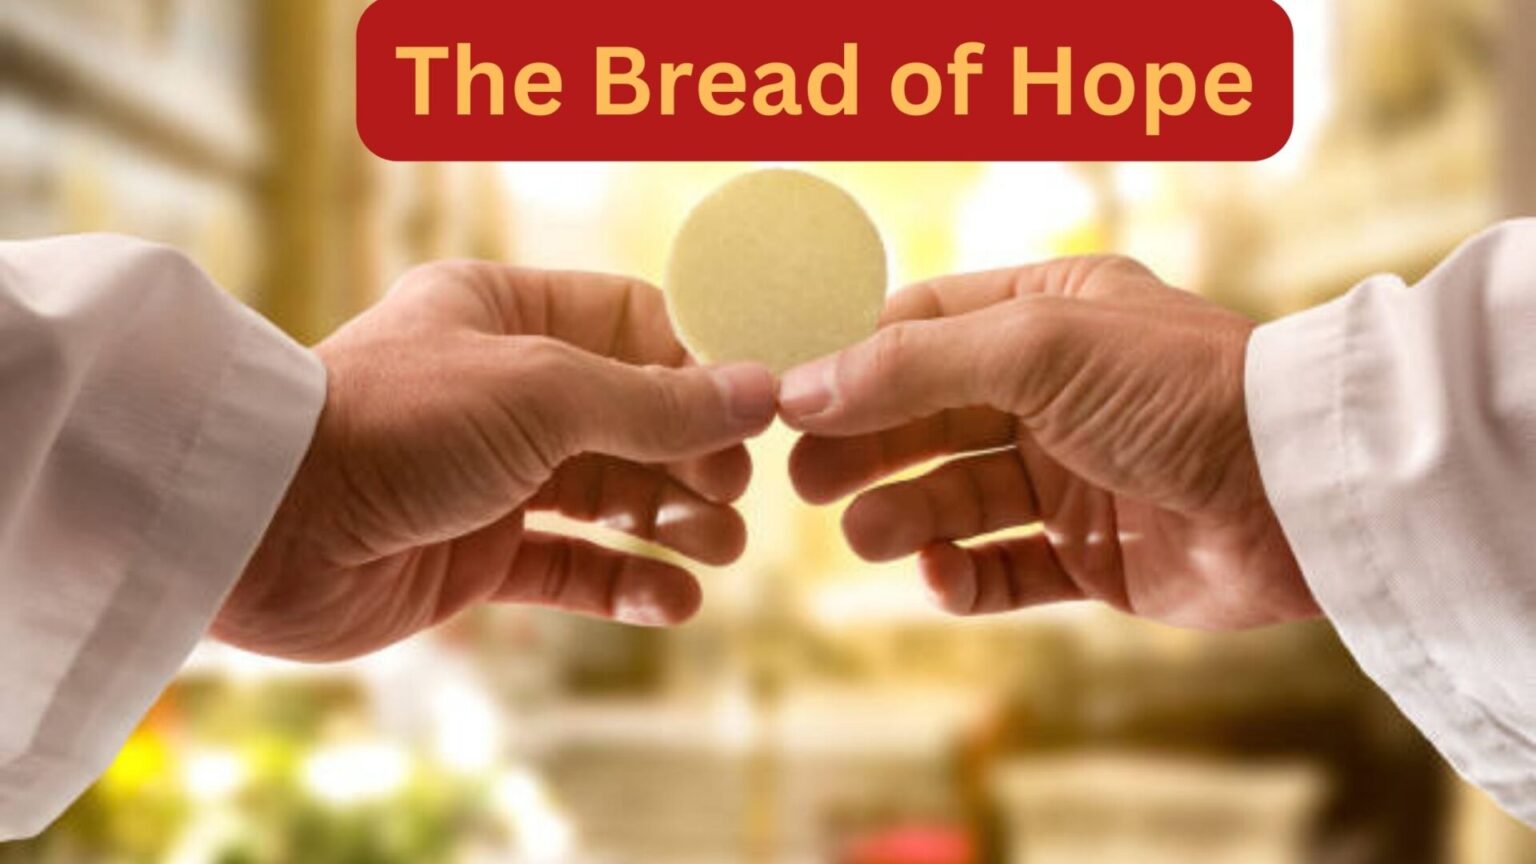 "The Bread of Hope: Reflecting on Jesus' Profound Statement"